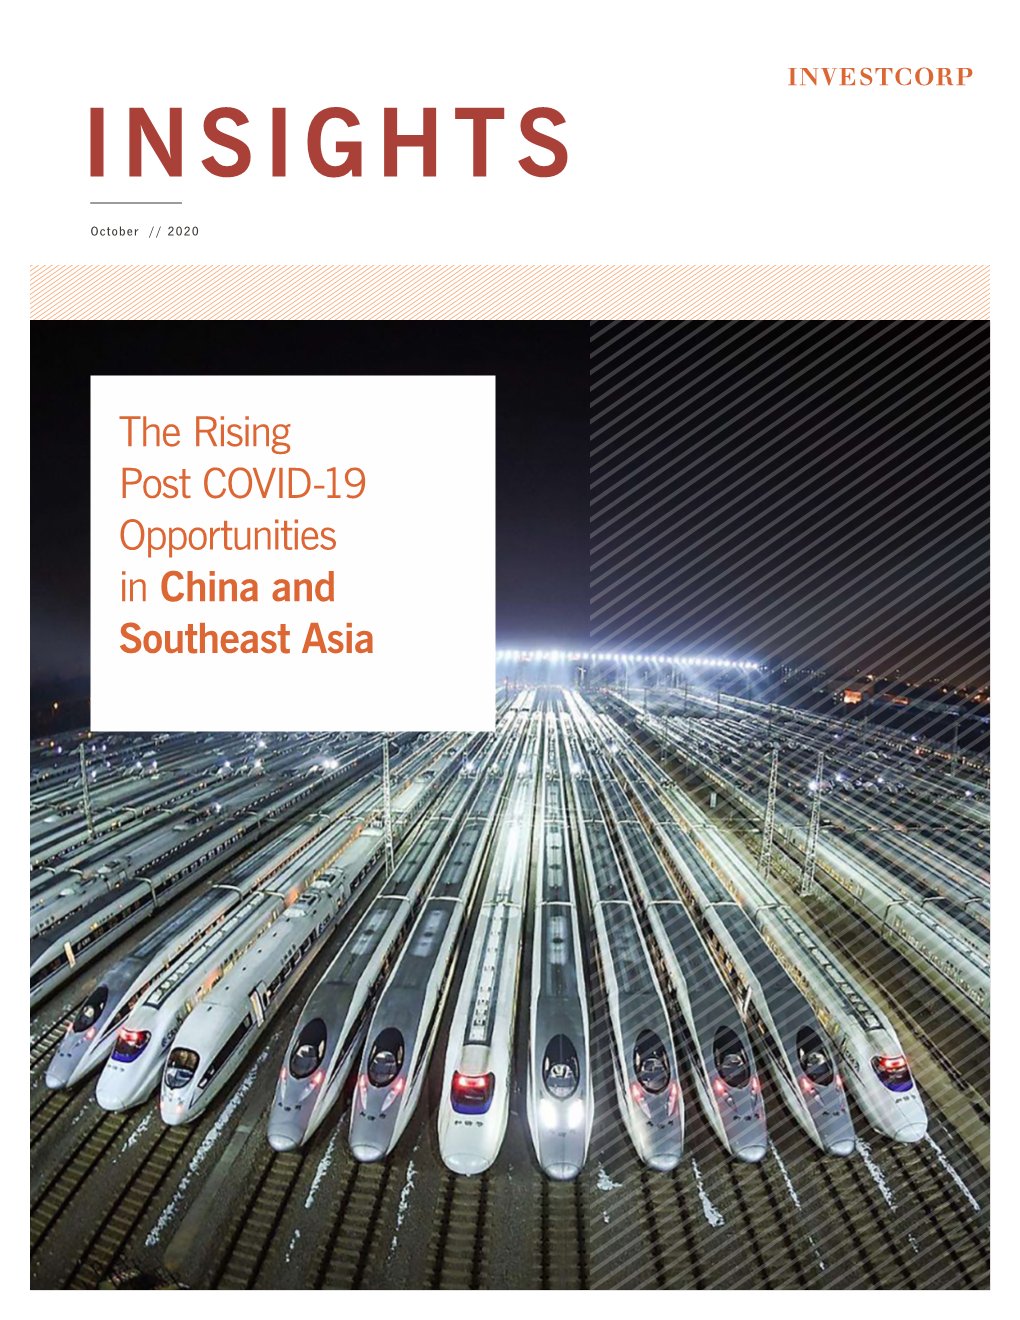 The Rising Opportunities in China and Southeast Asia Post Covid19